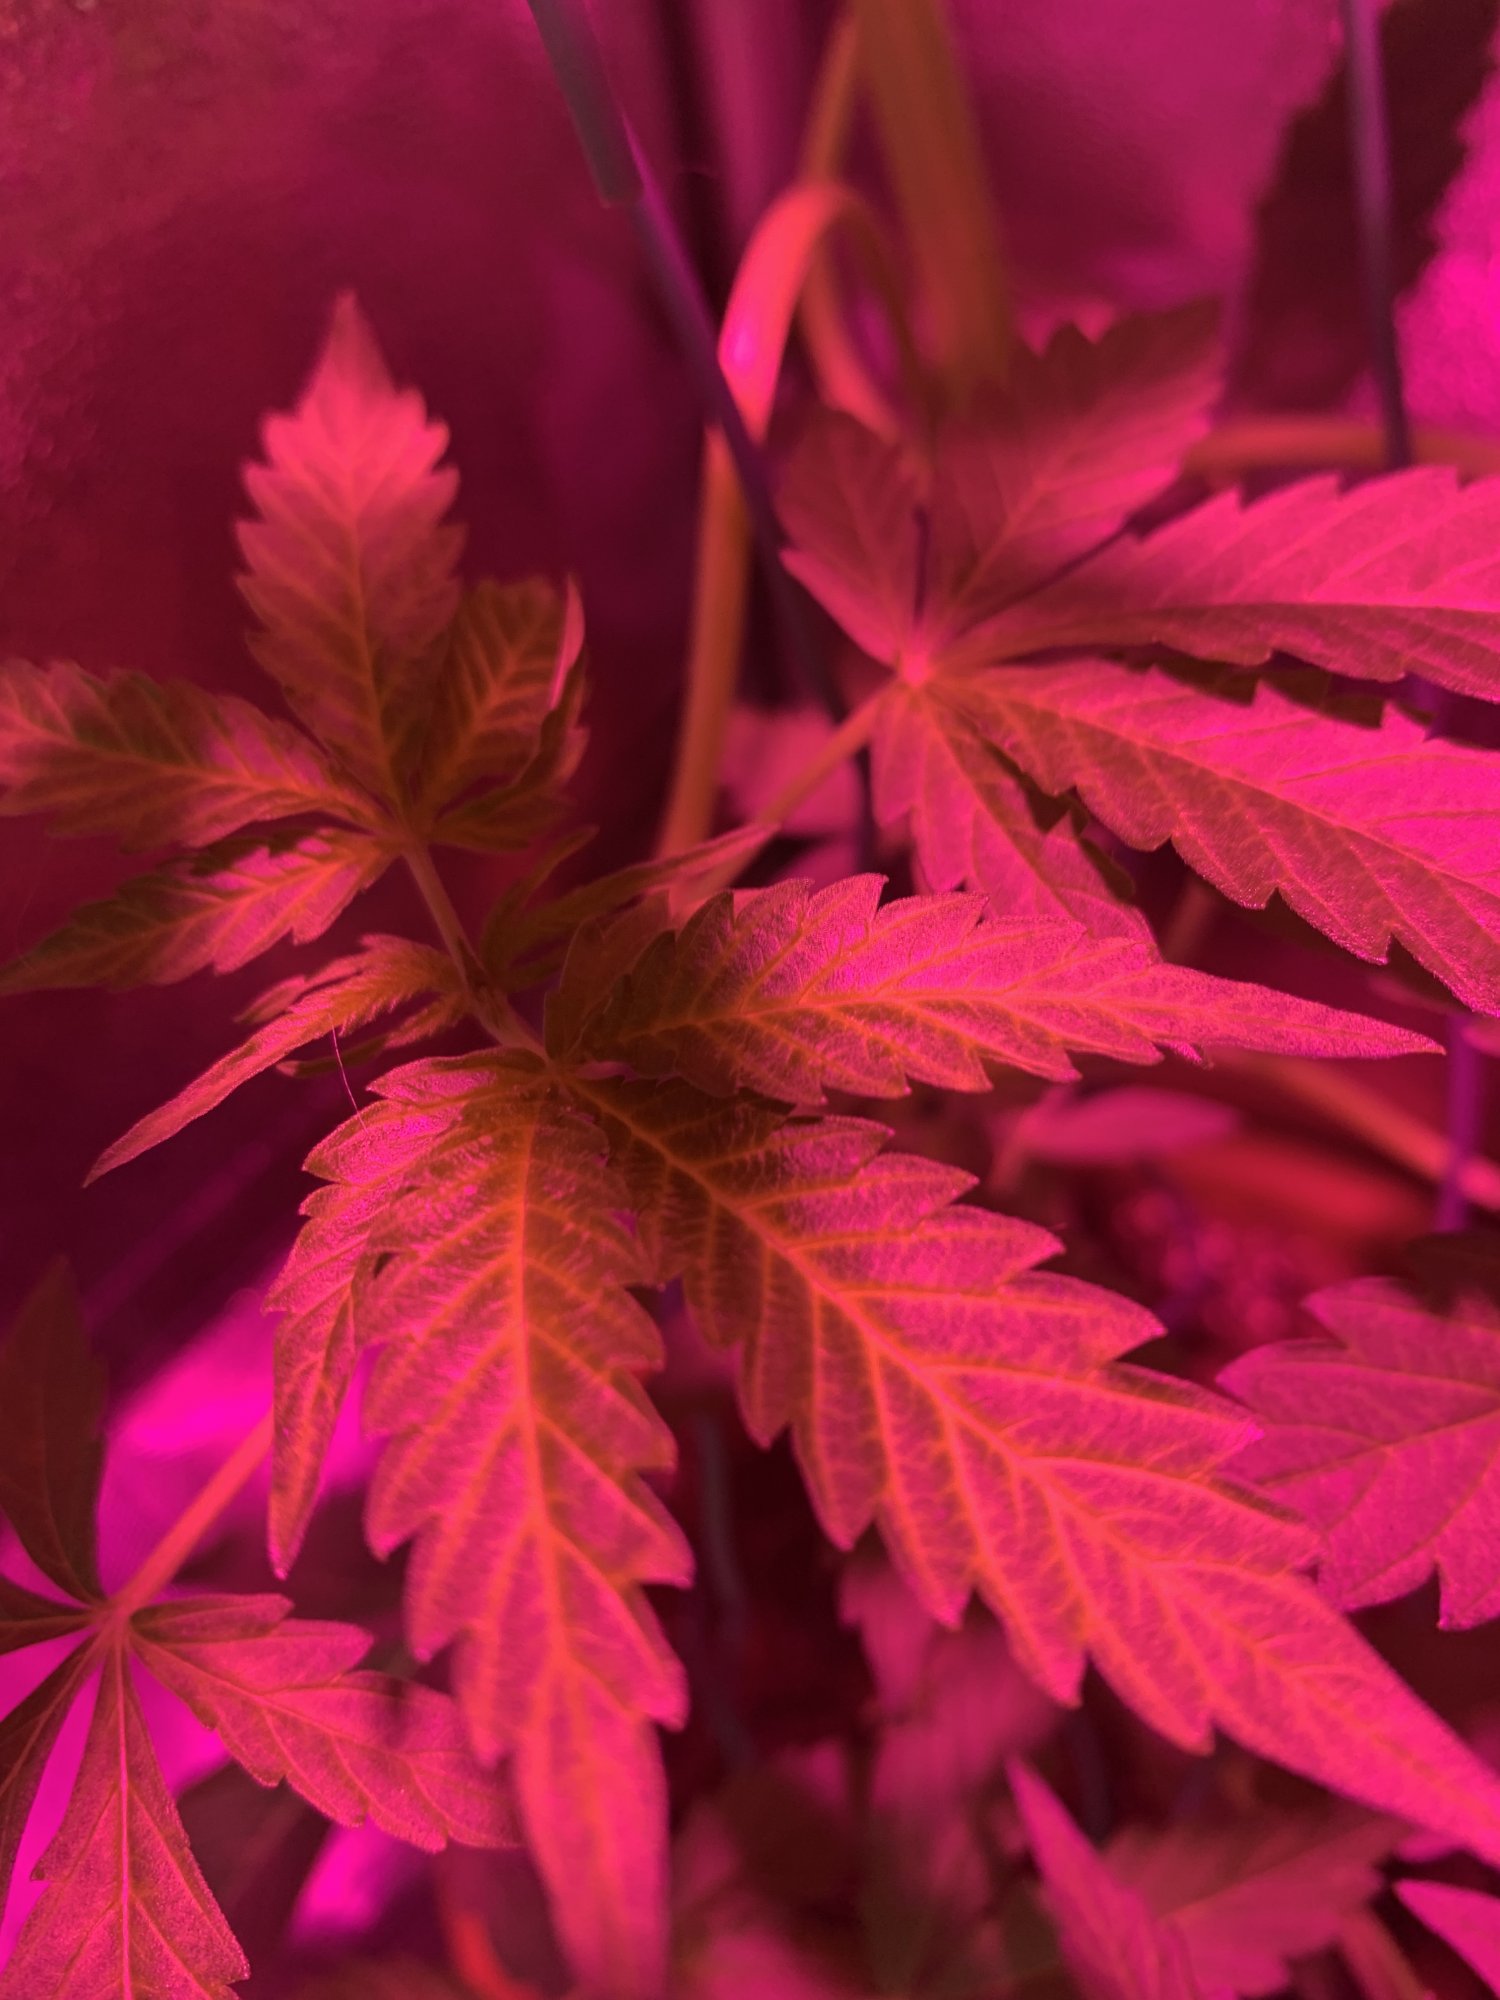 Nutrient deficiency or ph issues